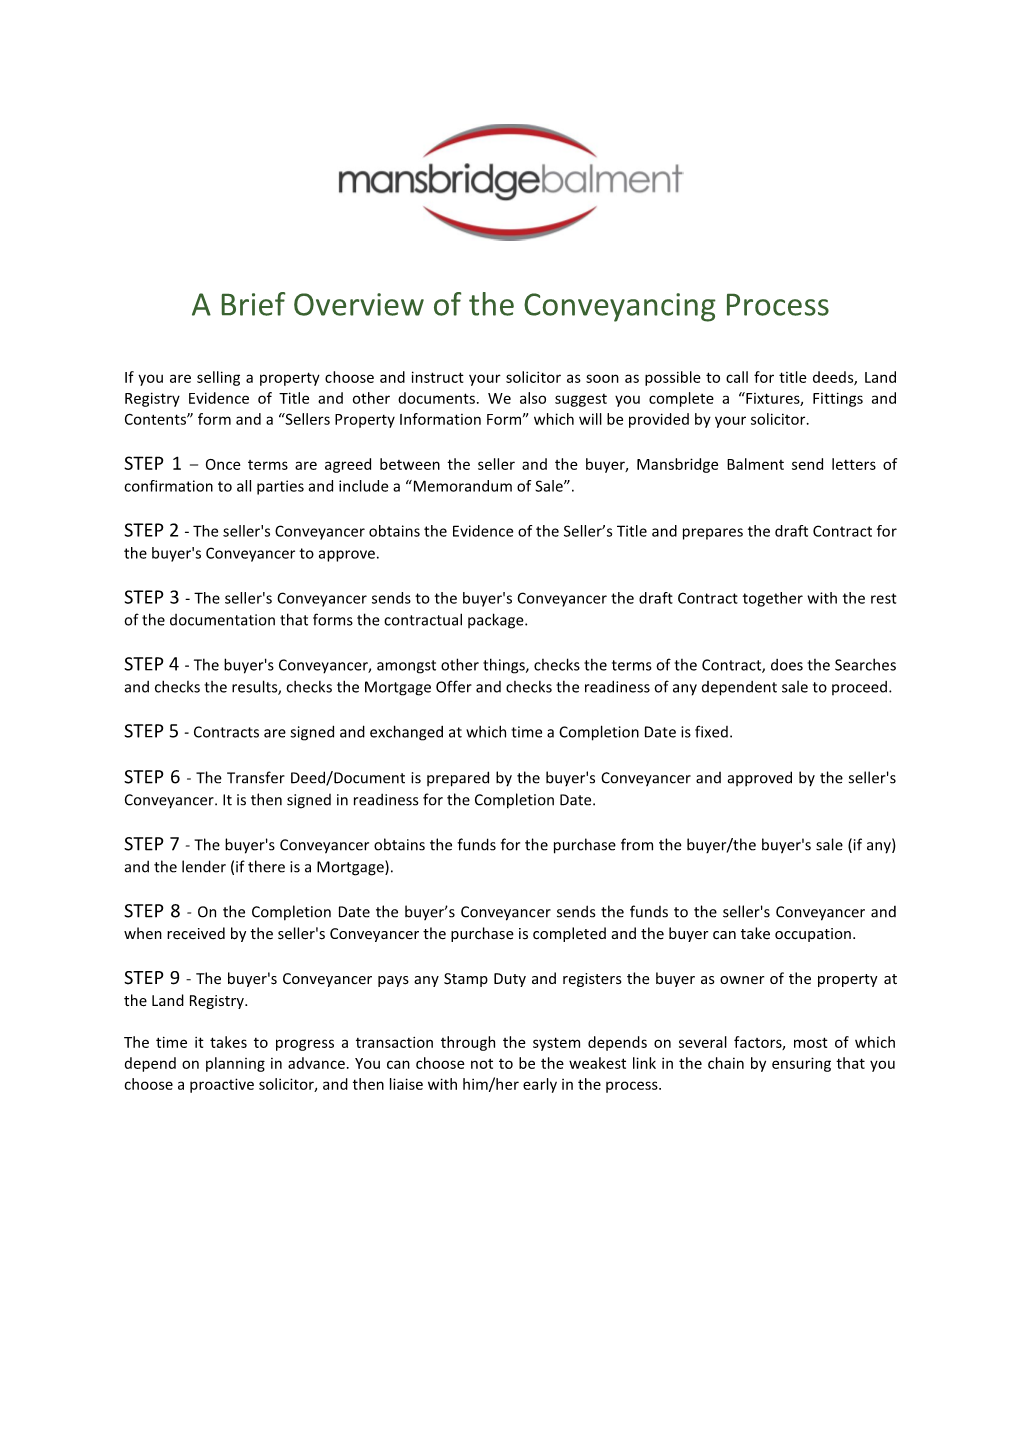 A Brief Overview of the Conveyancing Process